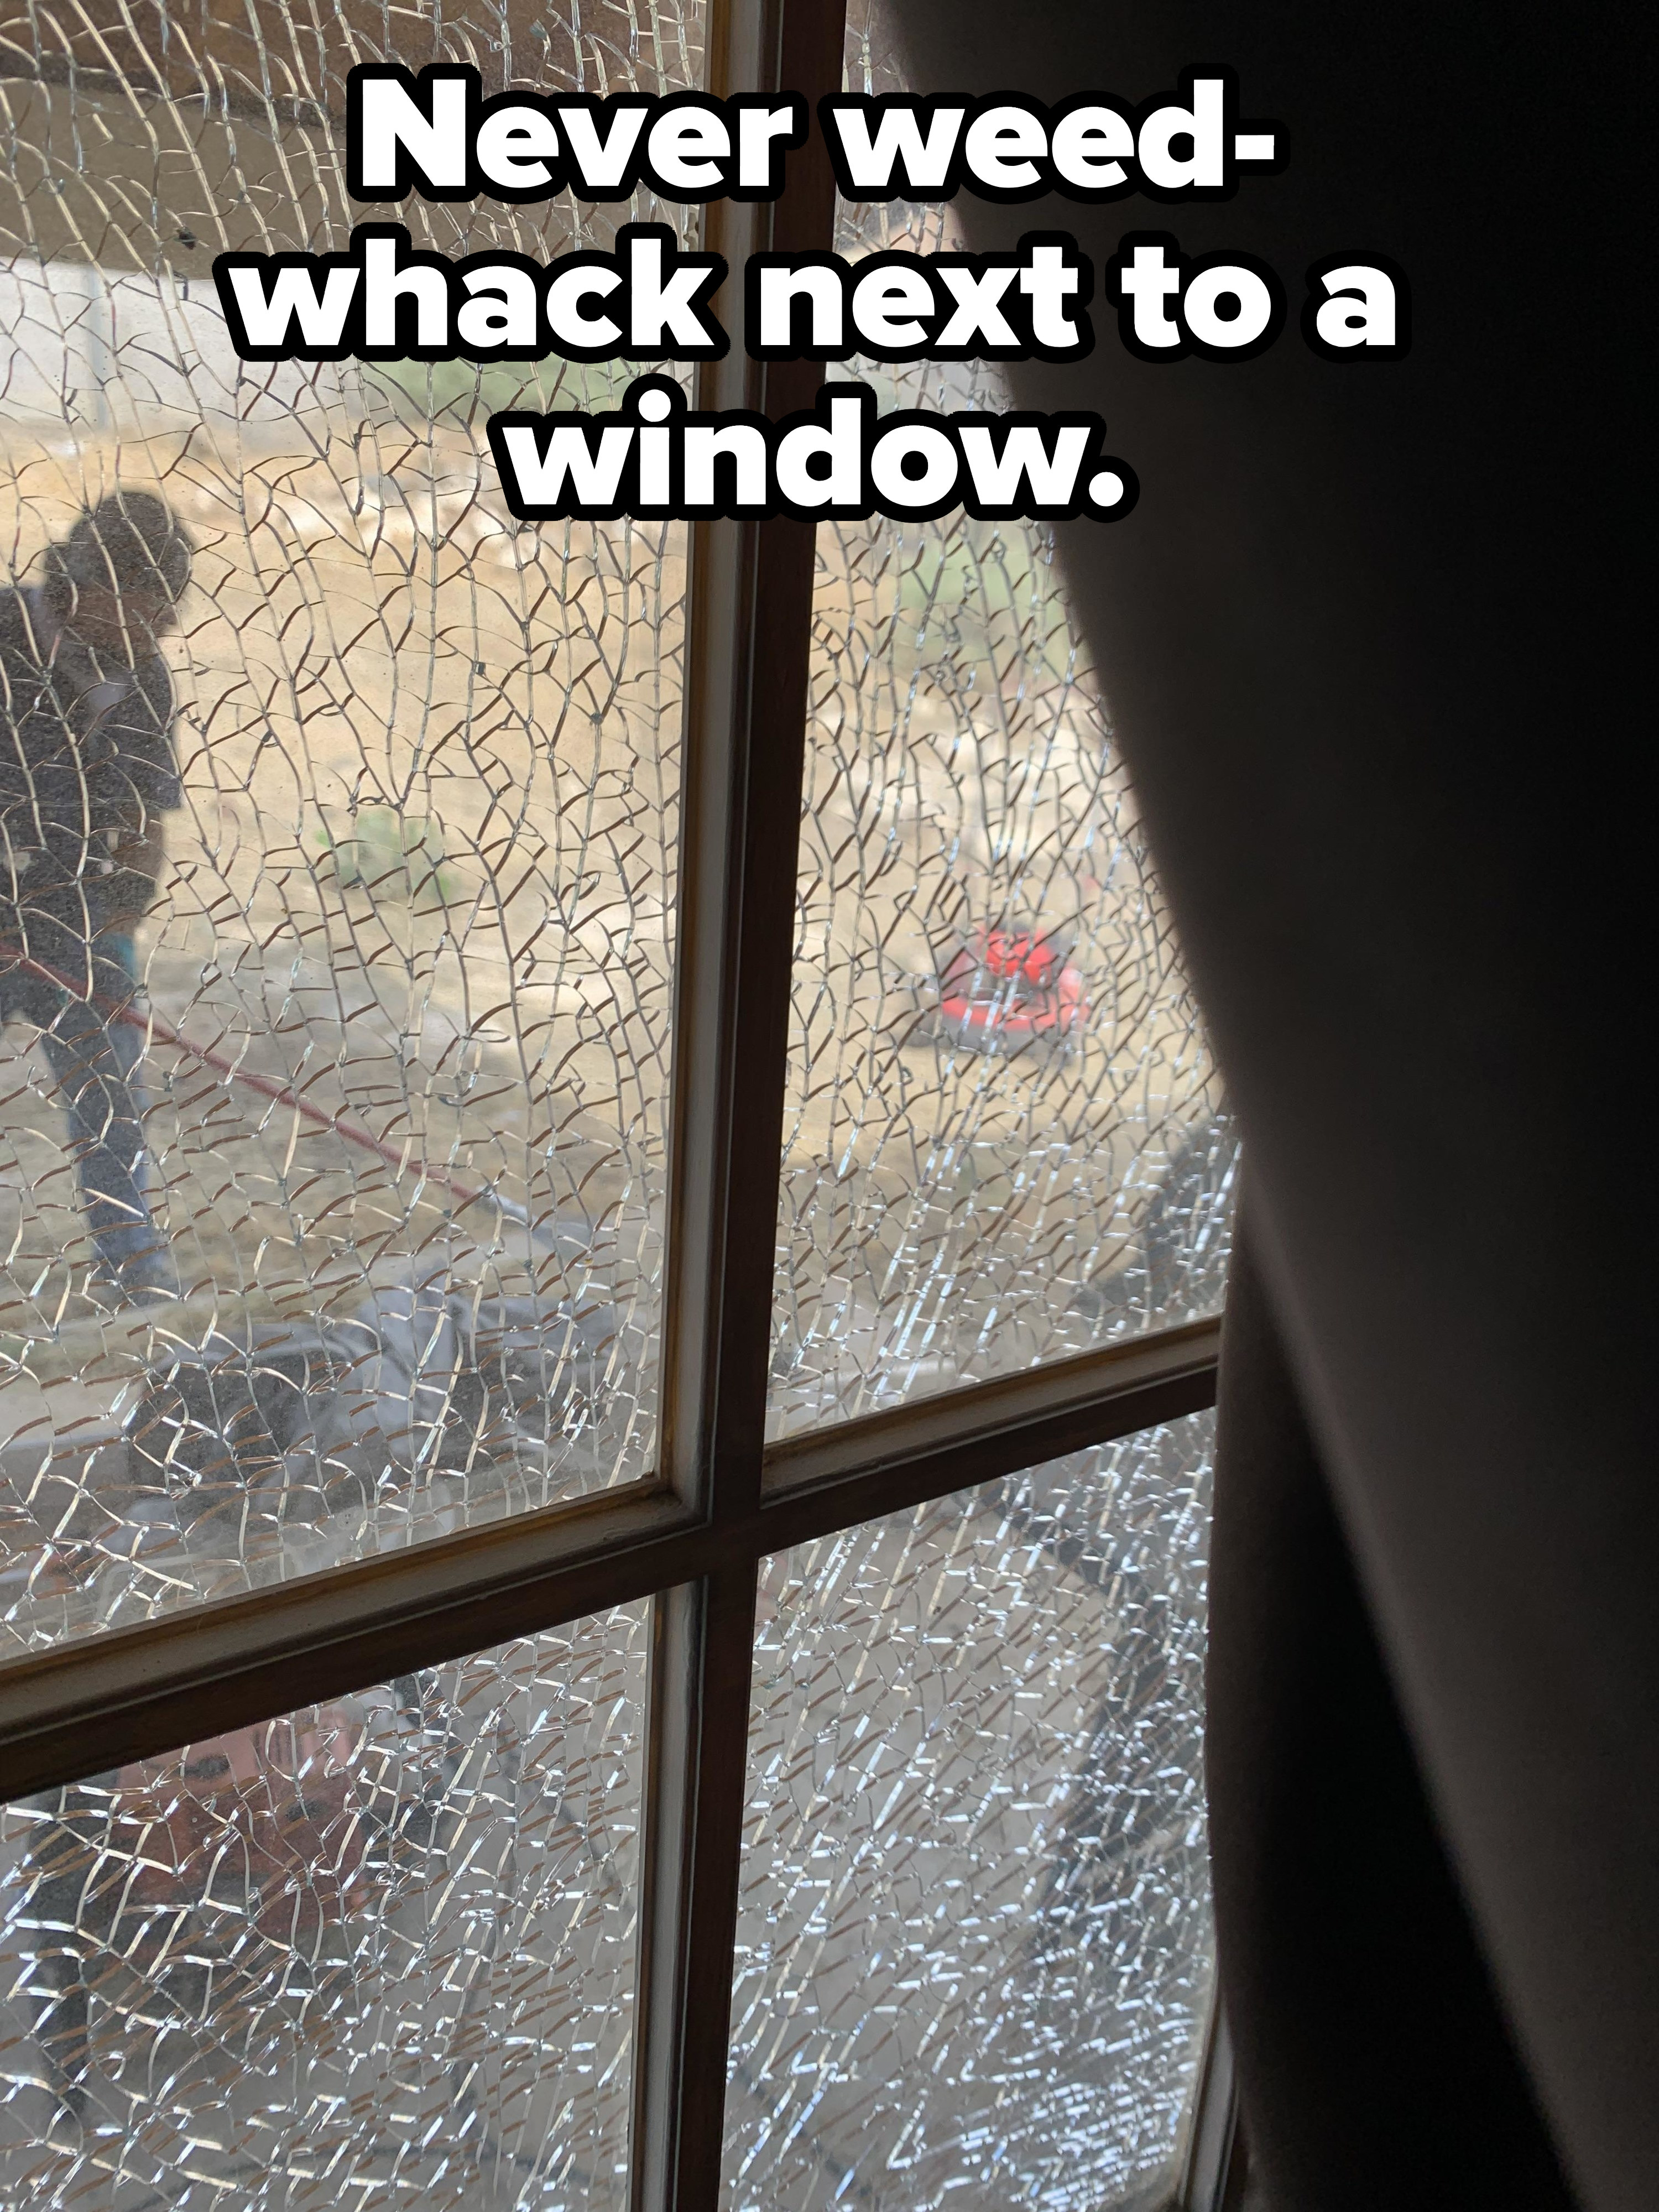 A shattered window